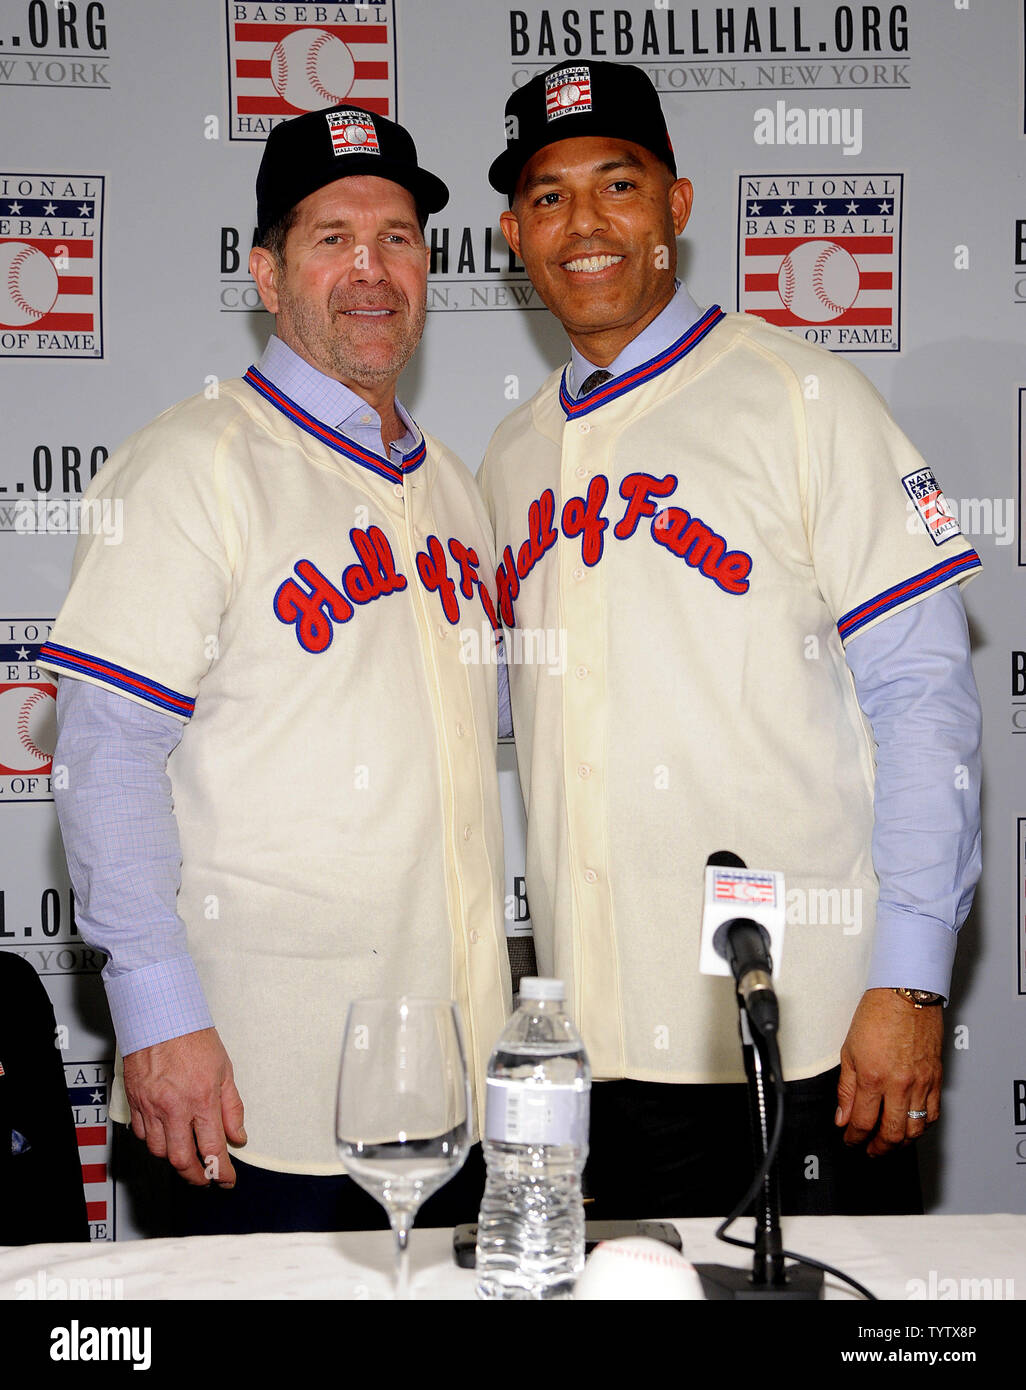 Mike Mussina and Mariano Rivera put on their Hall of Fame uniform